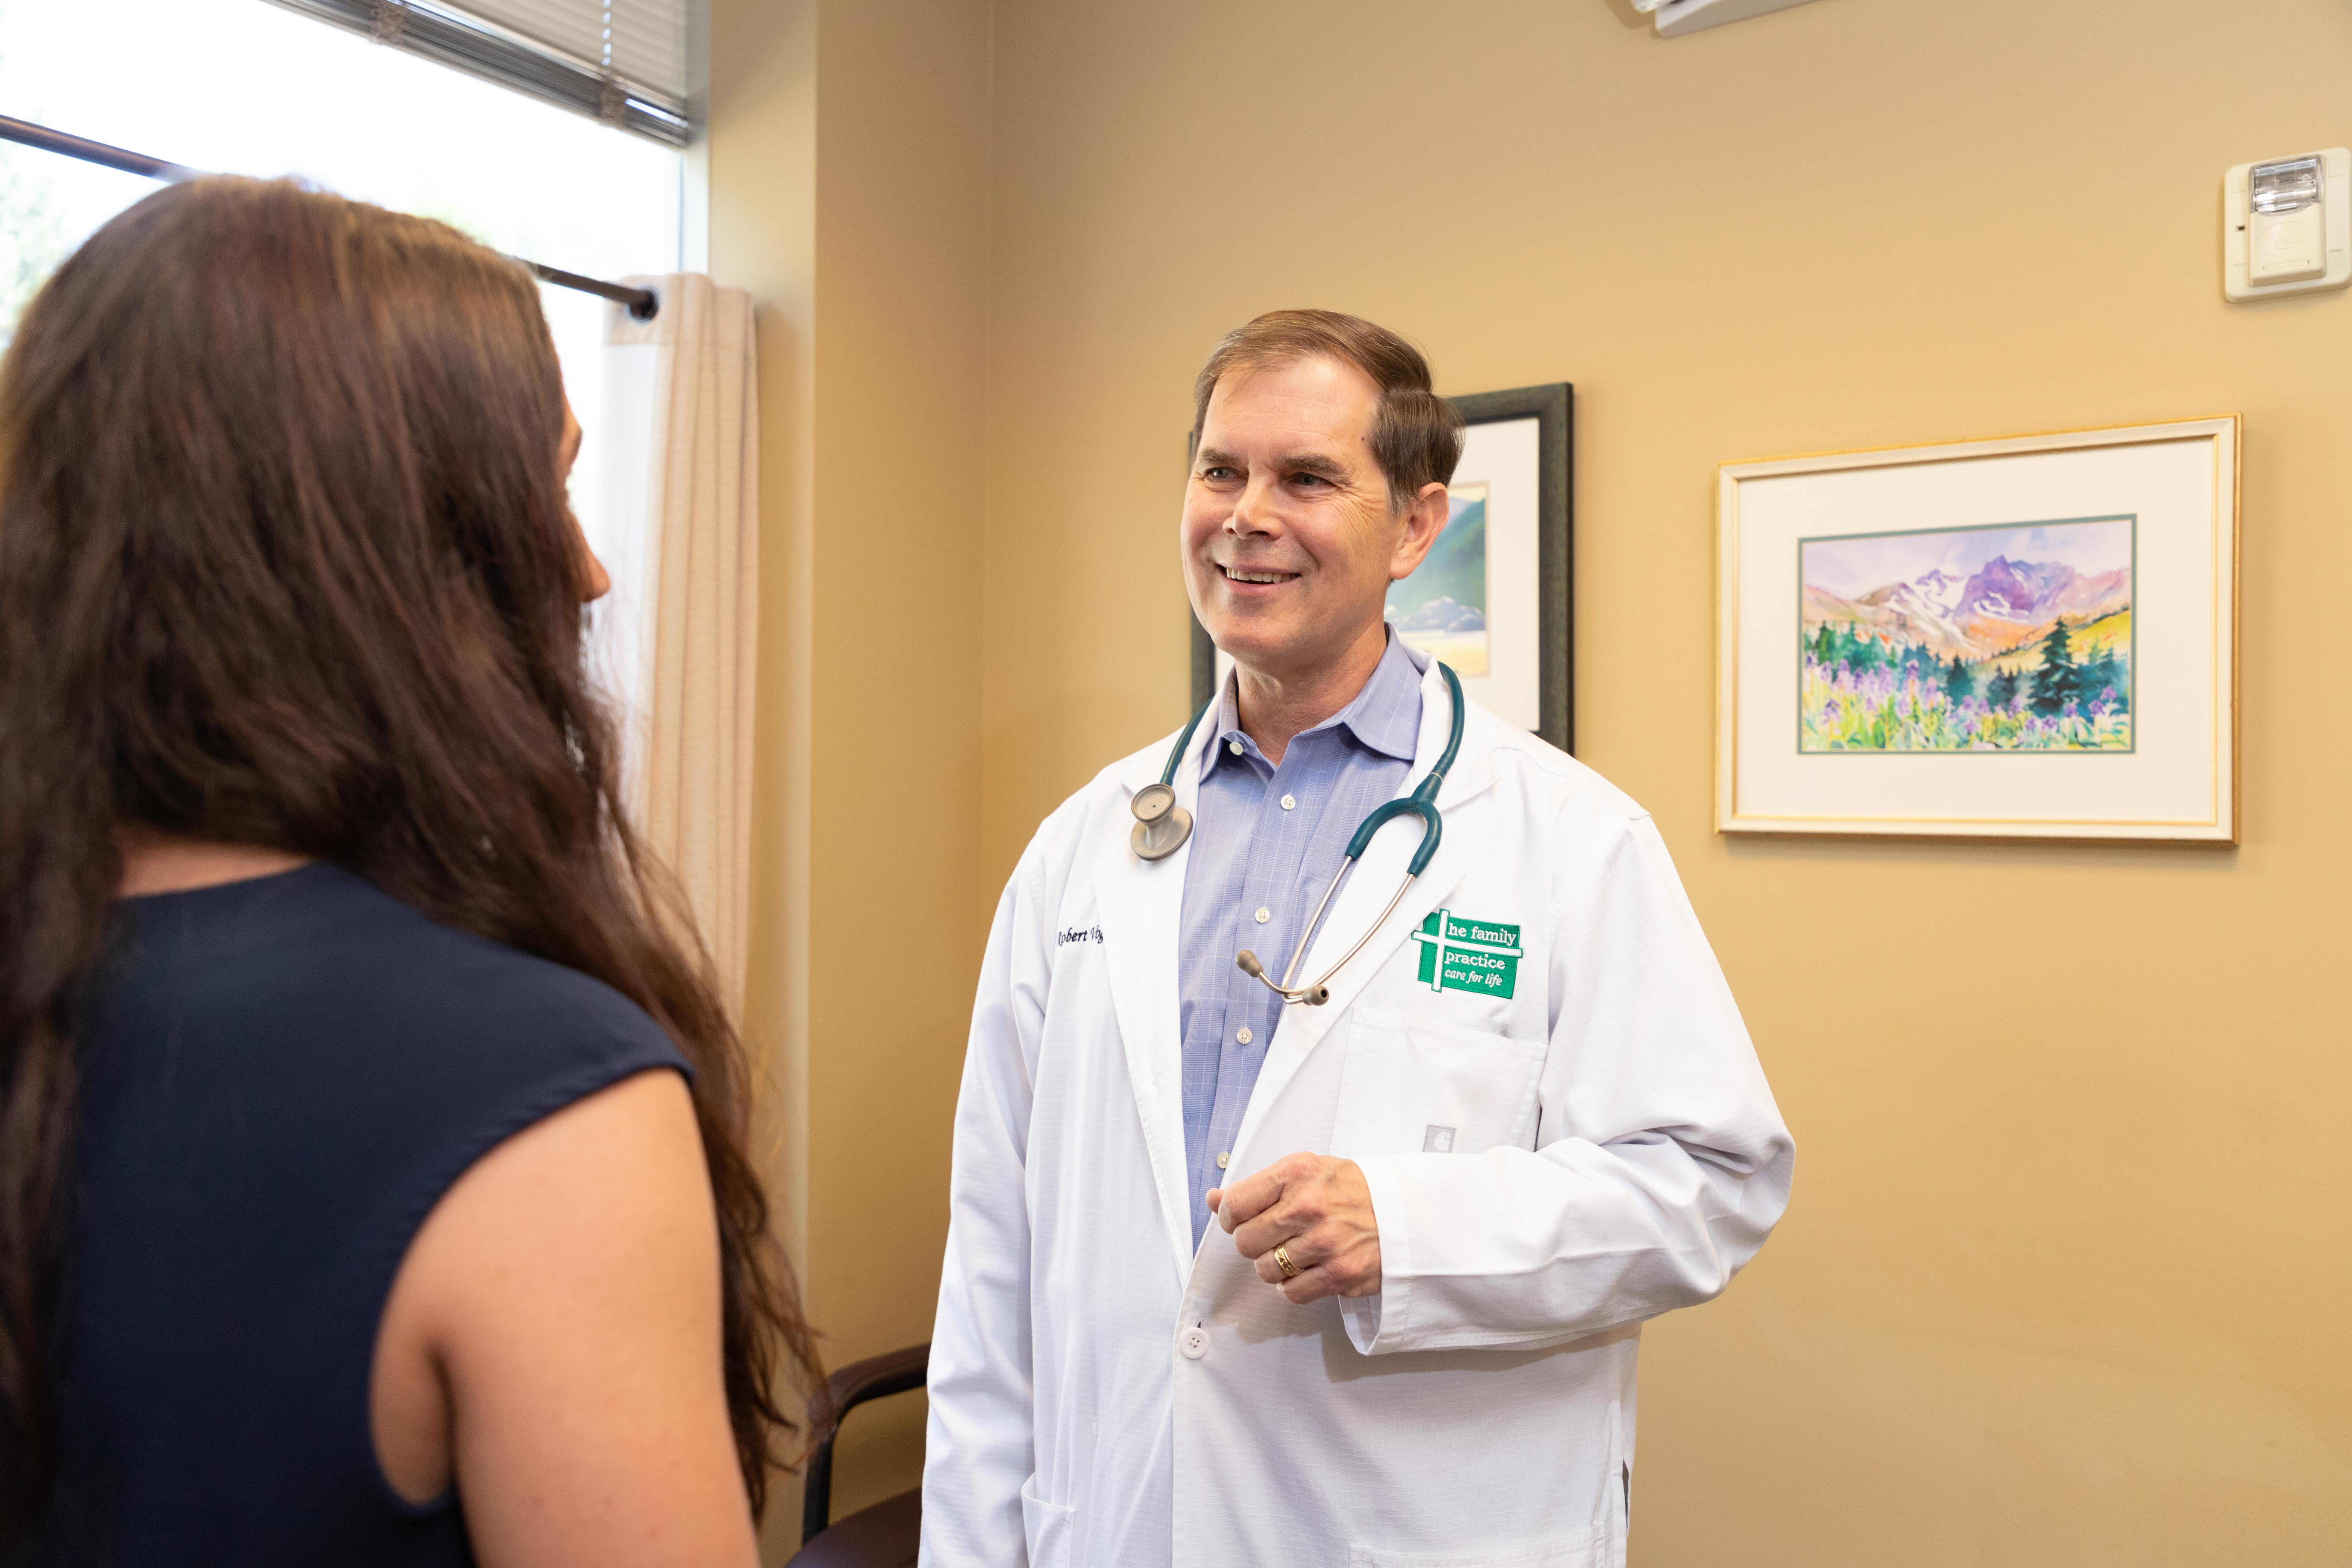 Colorado Springs Physician, Dr. Robert Vogt Collaborates with Castle Connolly Private Health Partners to Create a Concierge Medical Program Offering Patients A More Personalized Approach to Care